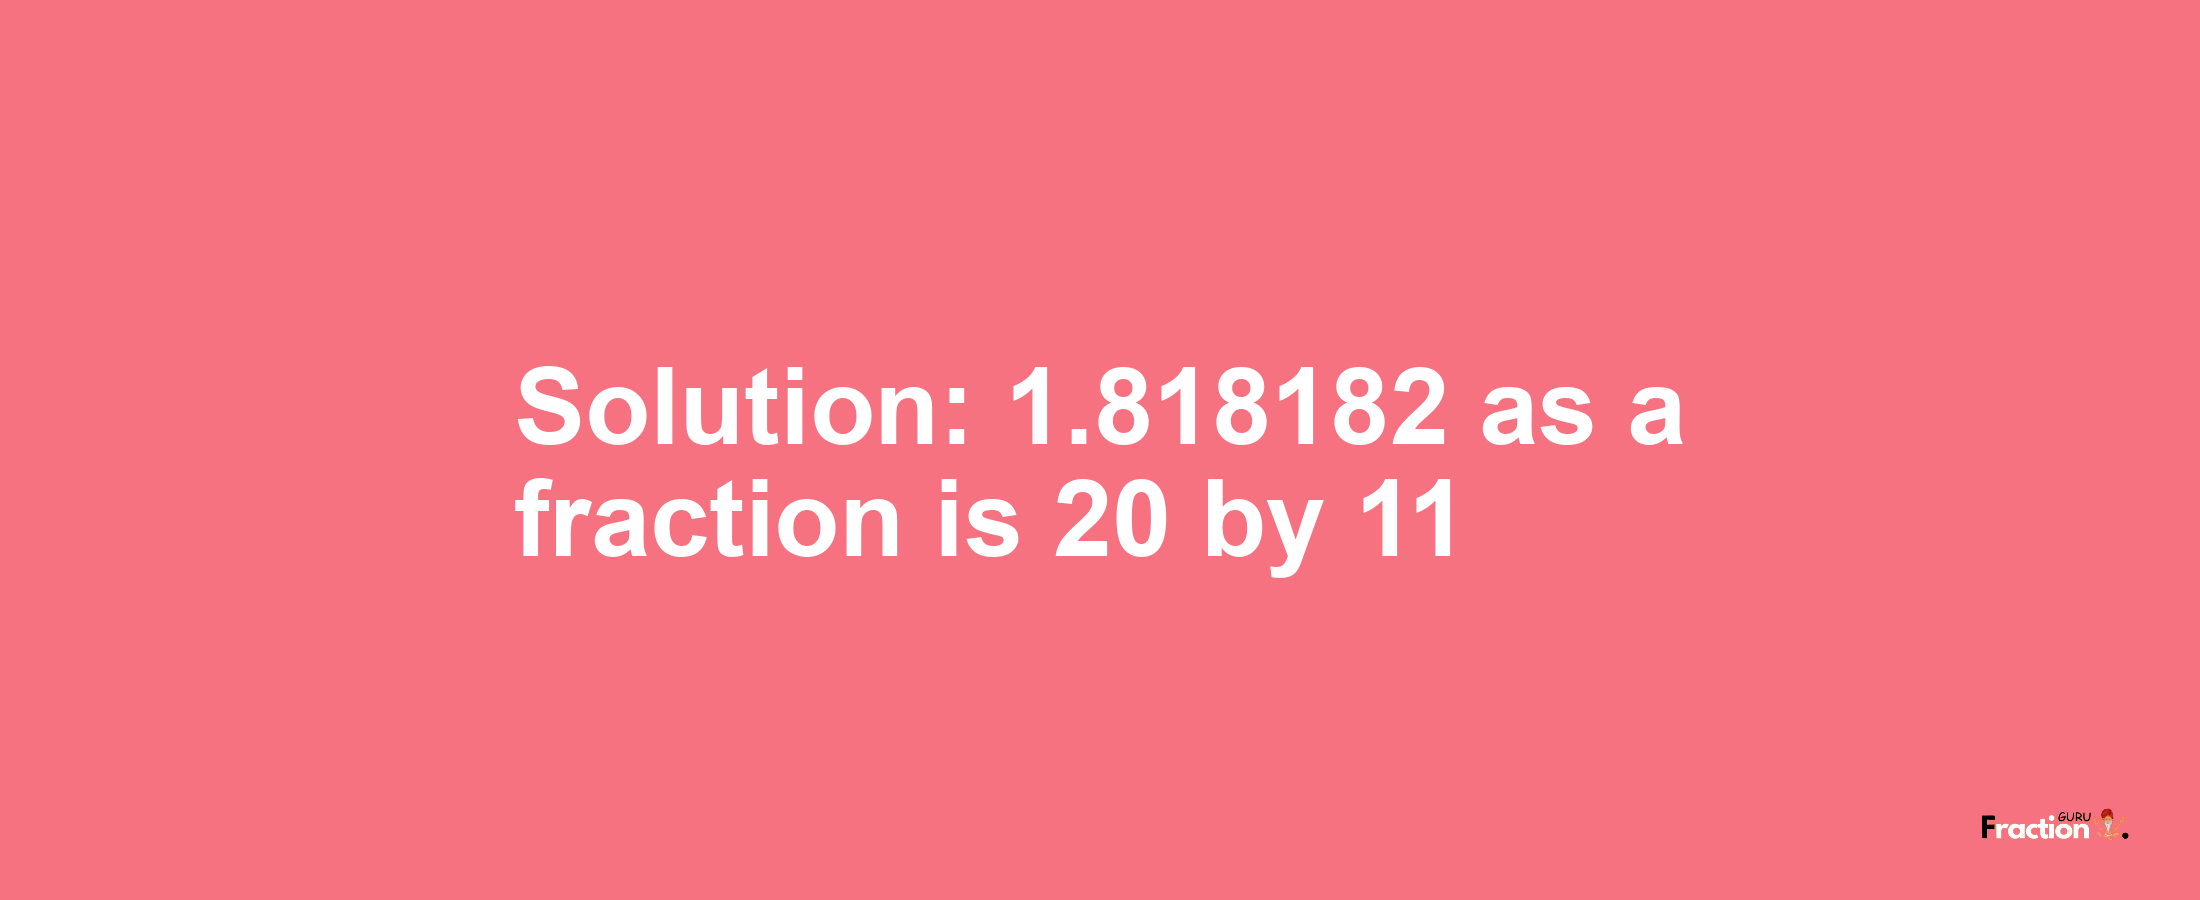 Solution:1.818182 as a fraction is 20/11